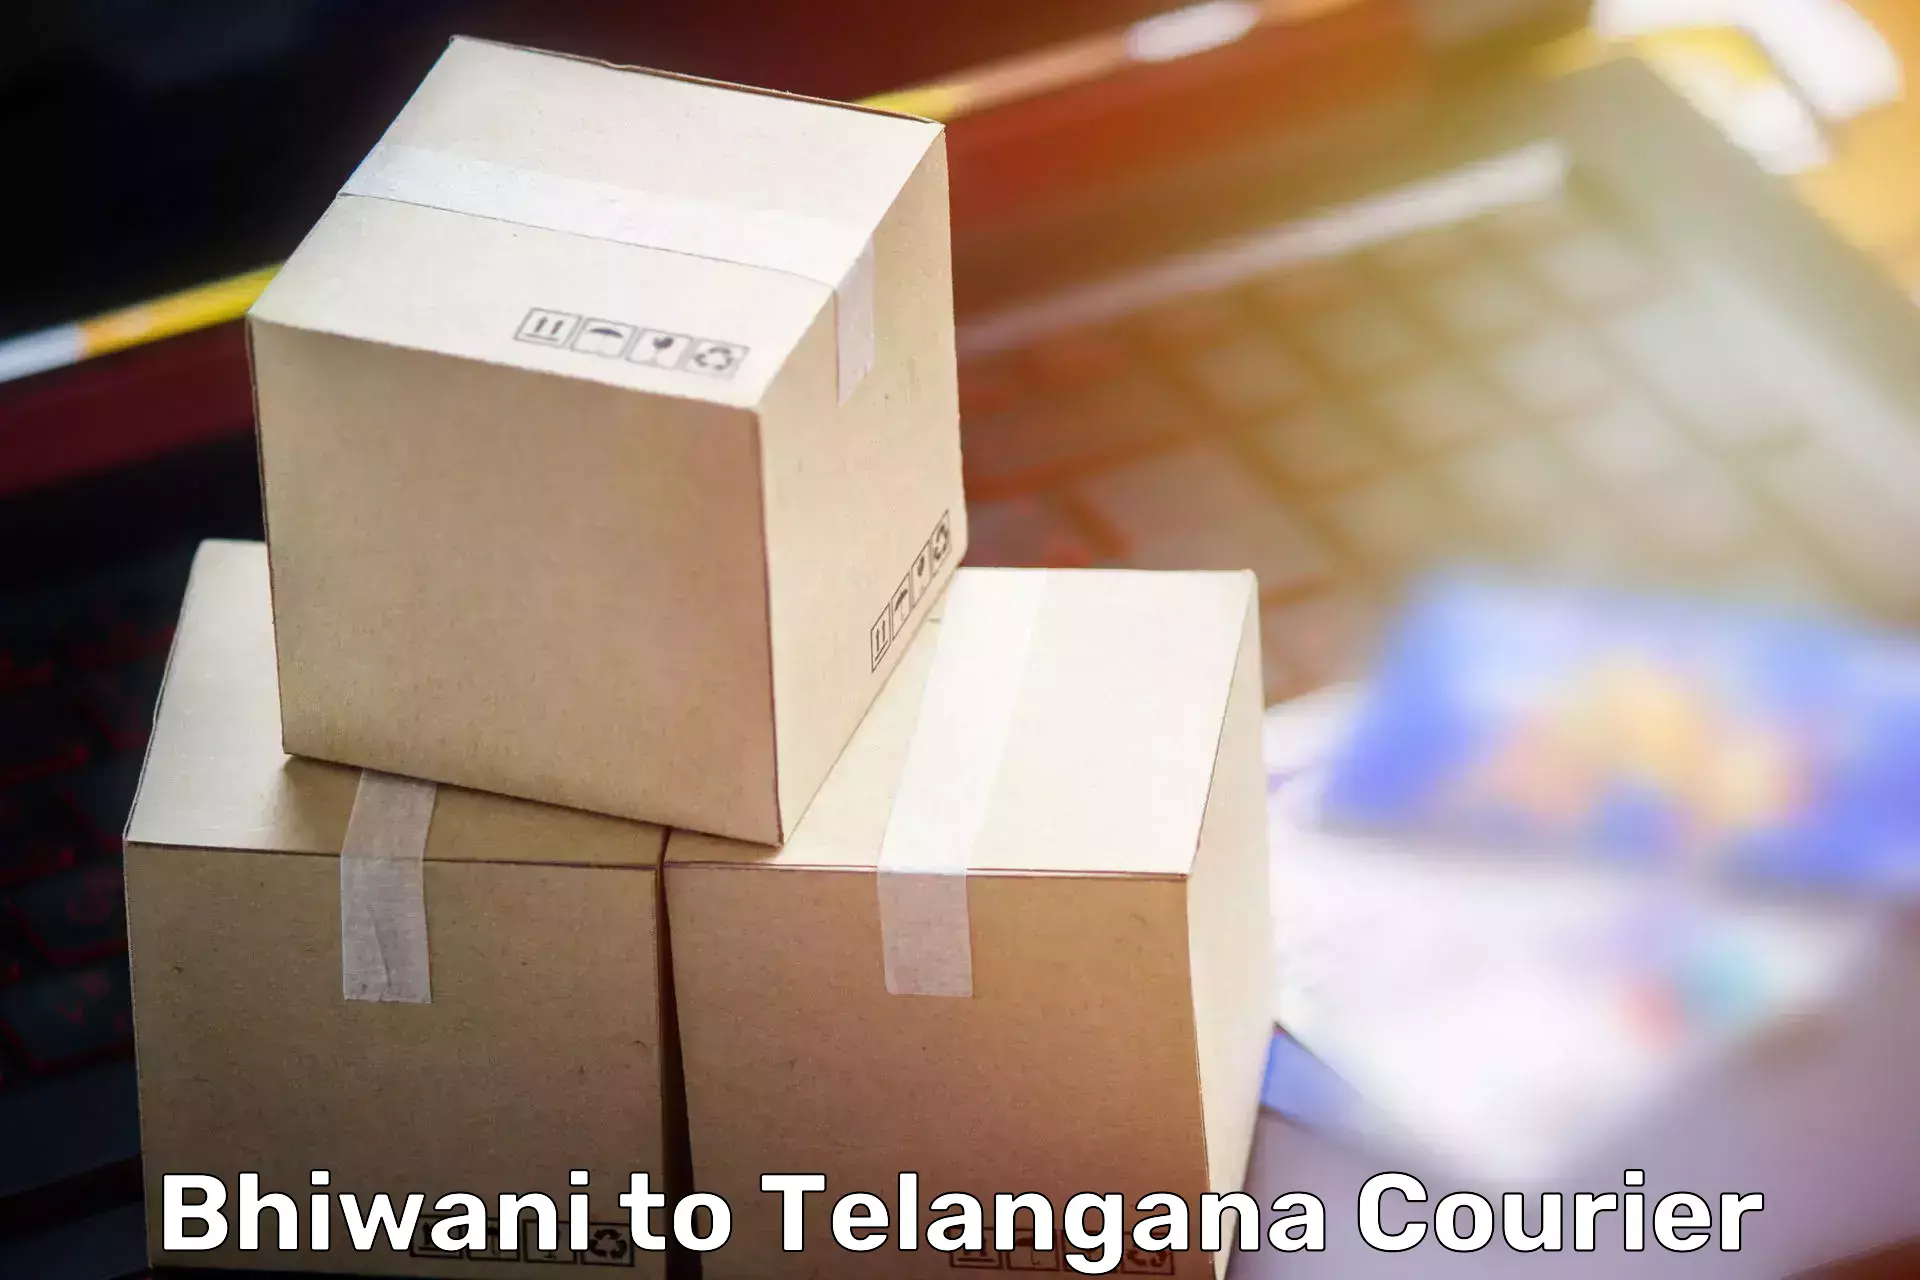 Quality relocation assistance Bhiwani to Sultanabad